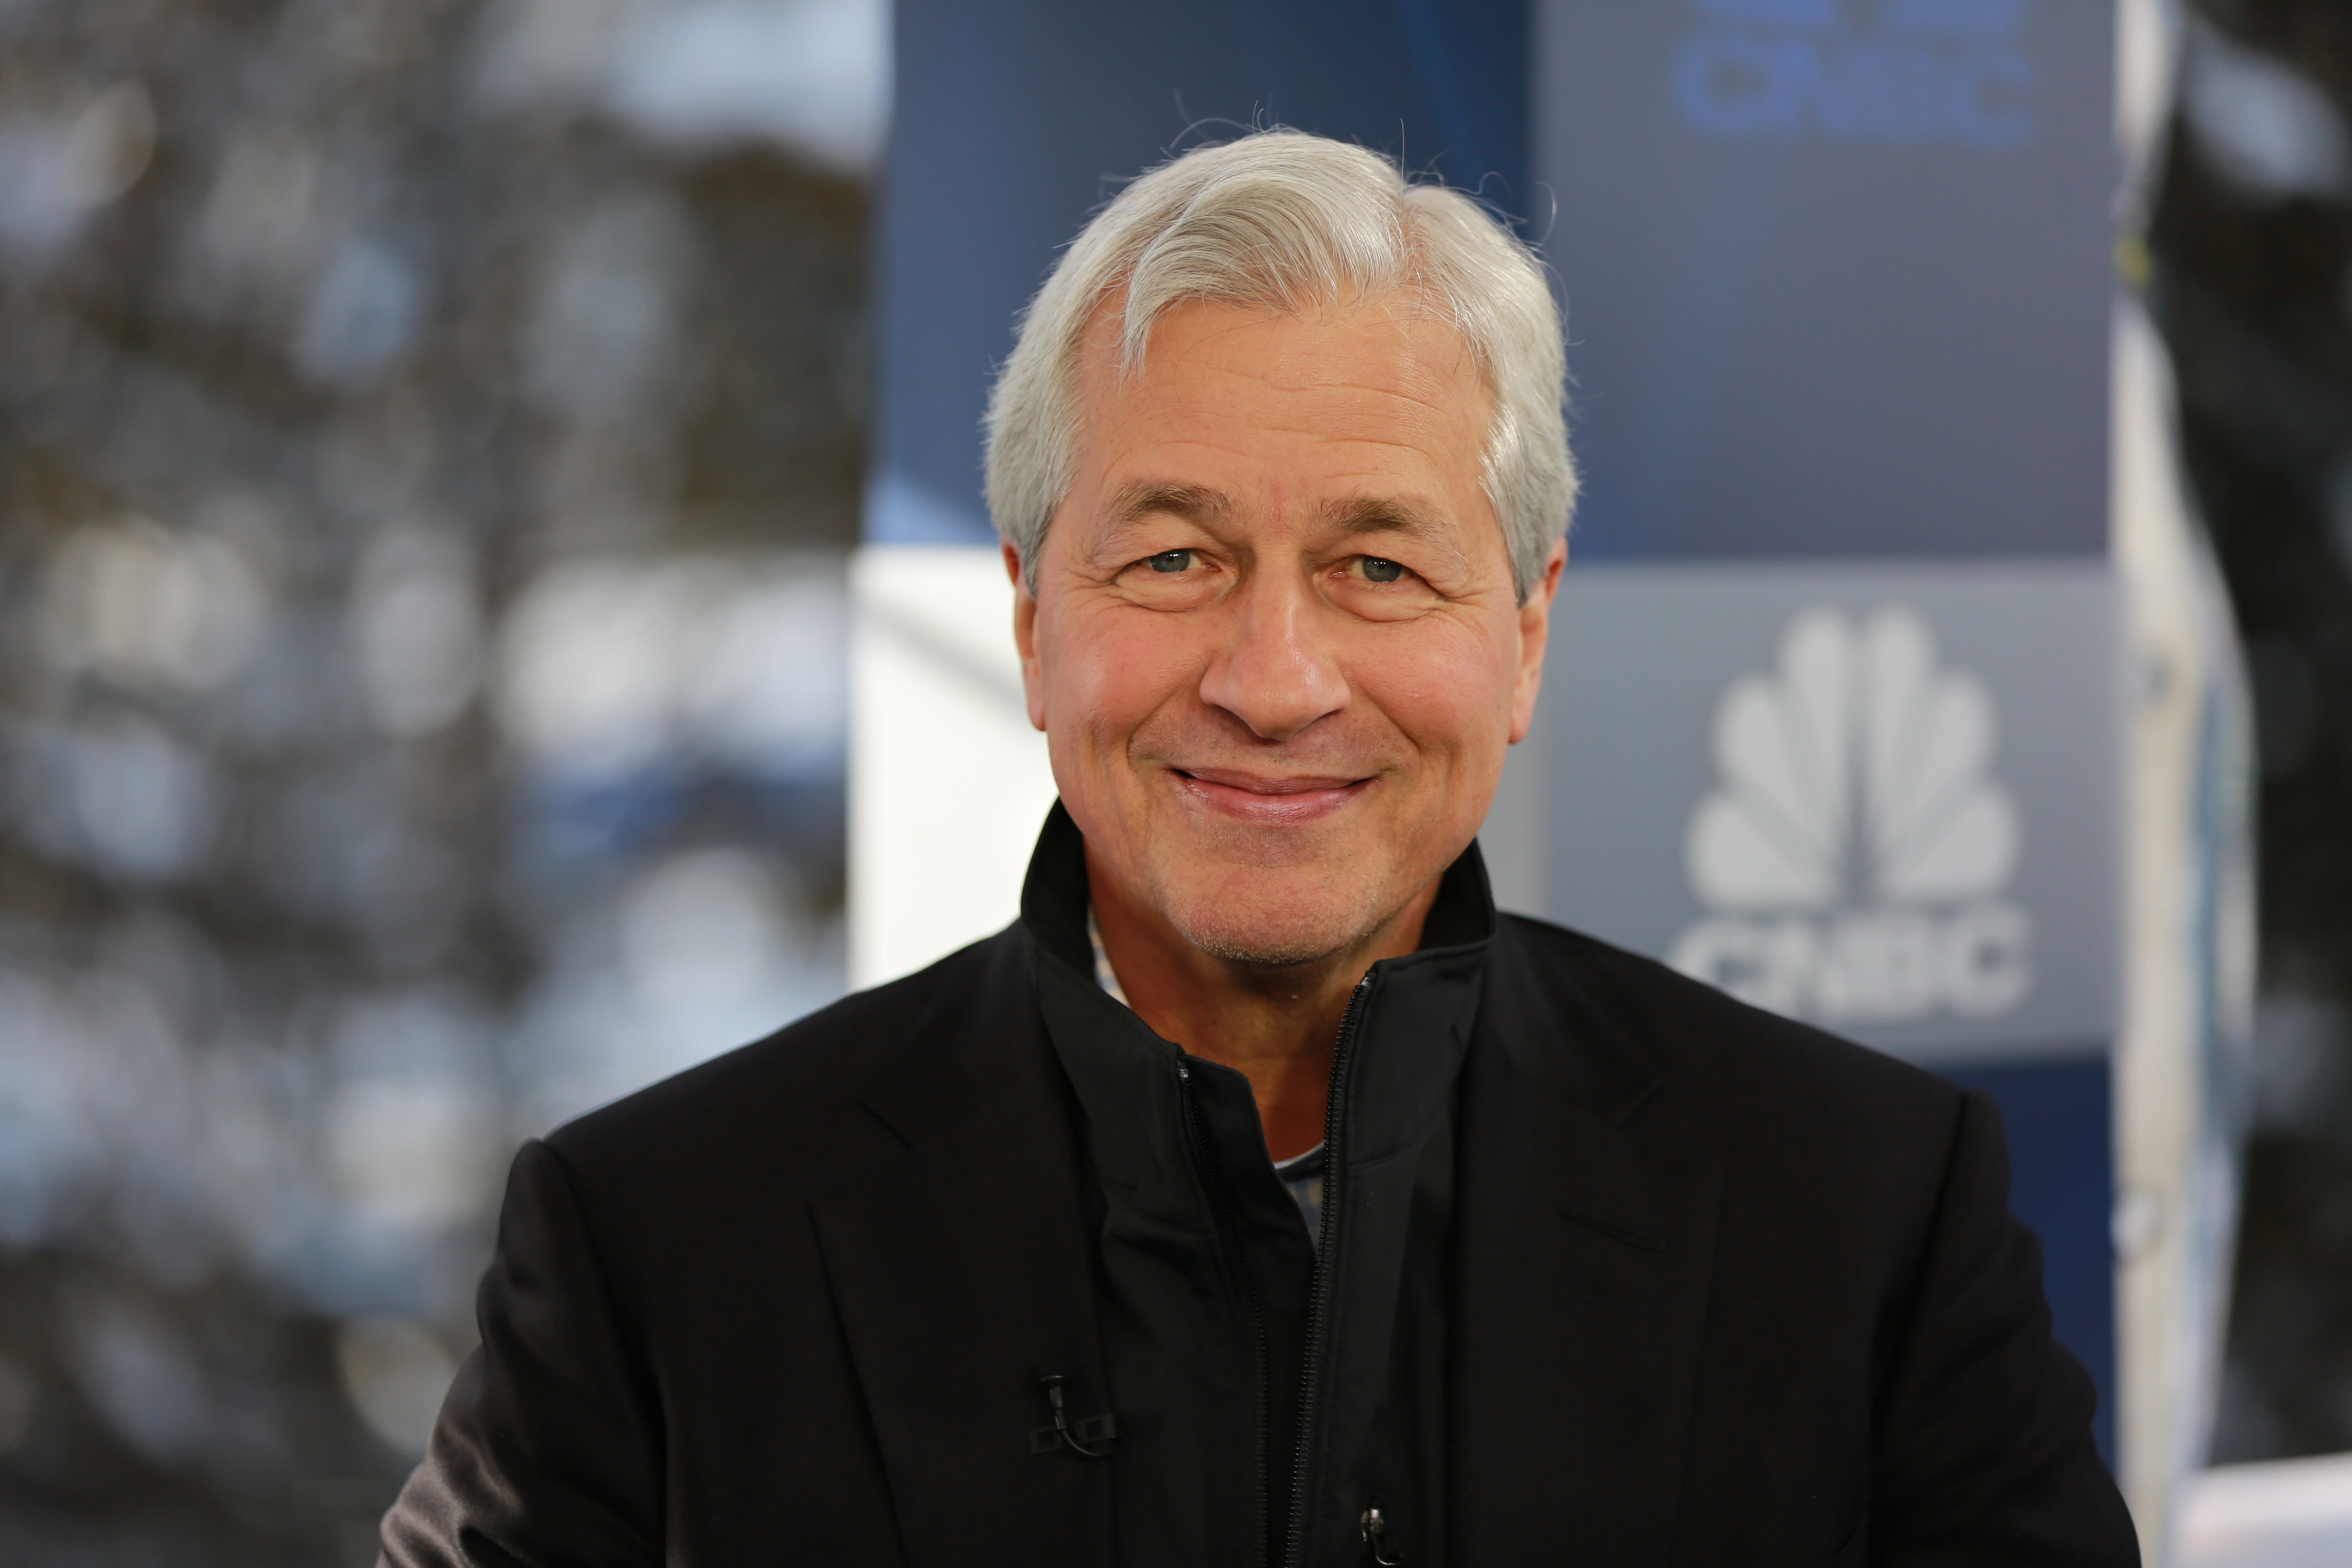 Jamie Dimon says the economic boom fueled by deficit spending could ‘easily amount to vaccines in 2023’